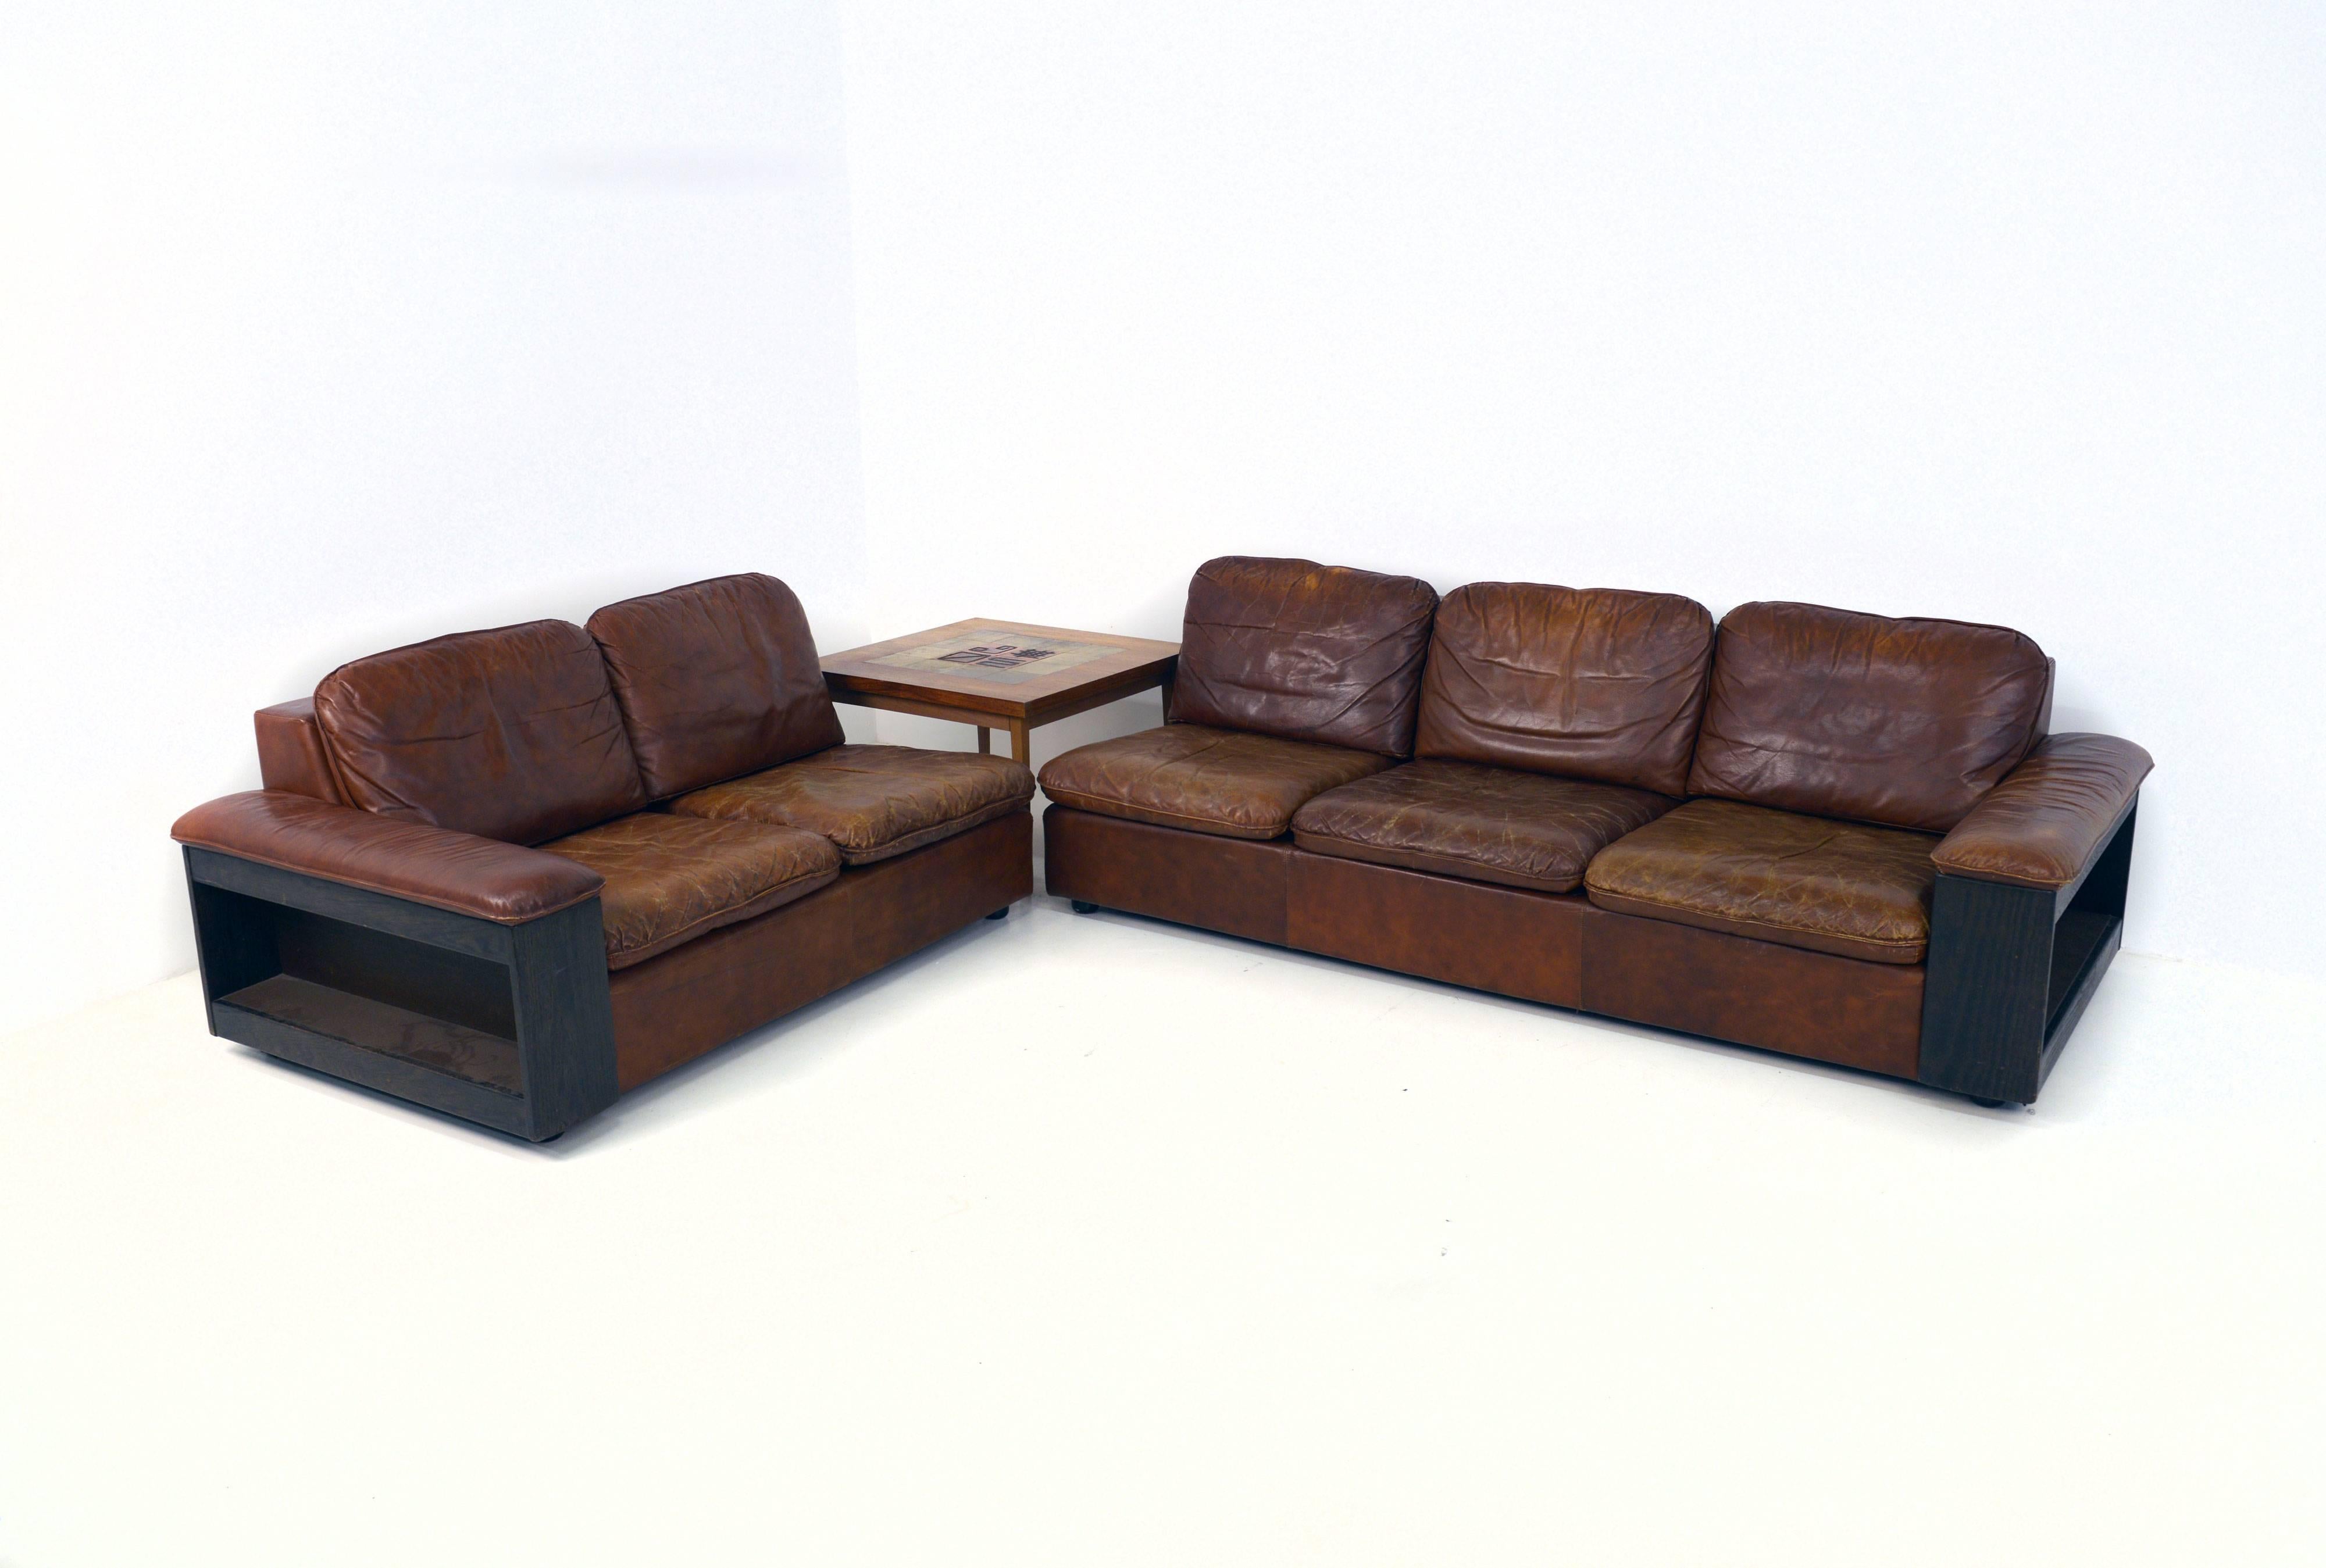 Very decorative five-seat leather sofa setting consisting of two parts.
On the back and side there is a bookcase.

Two-seat about: L 152, D 92, H 65 cm.
Three-seat about: L 215, D 92, H 65 cm.

Very nice vintage condition.
 